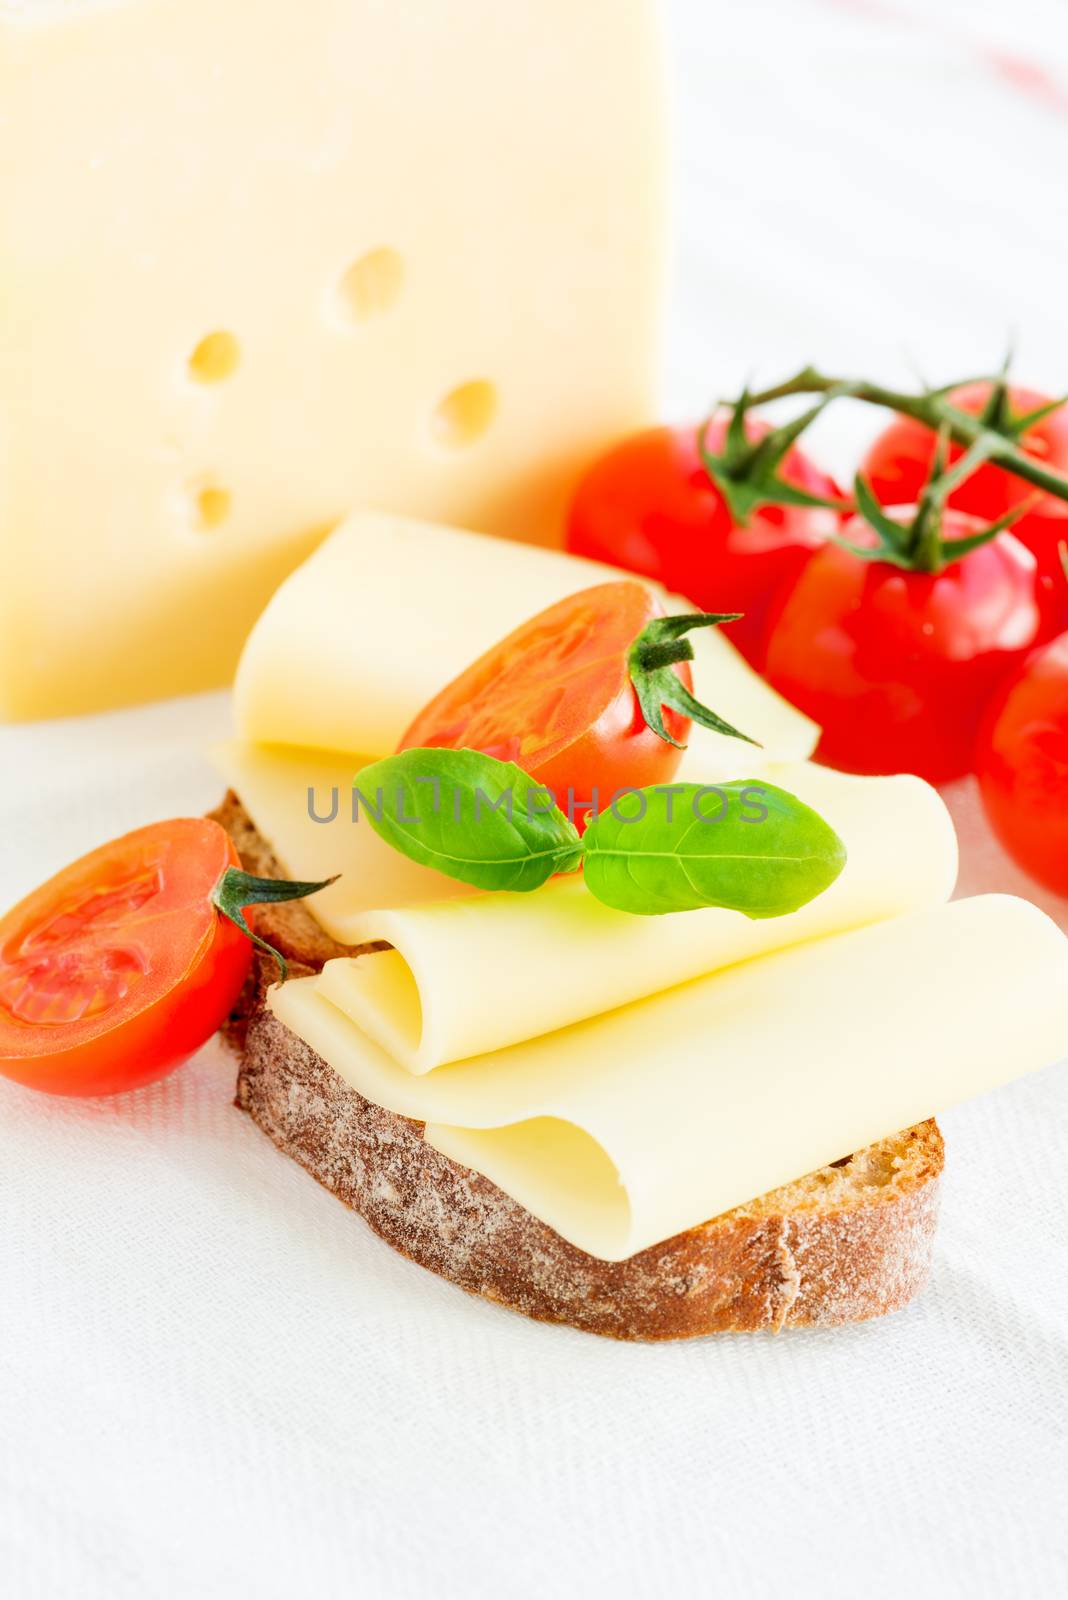 Cheese sandwich with fresh tomato and basil vertical by Nanisimova